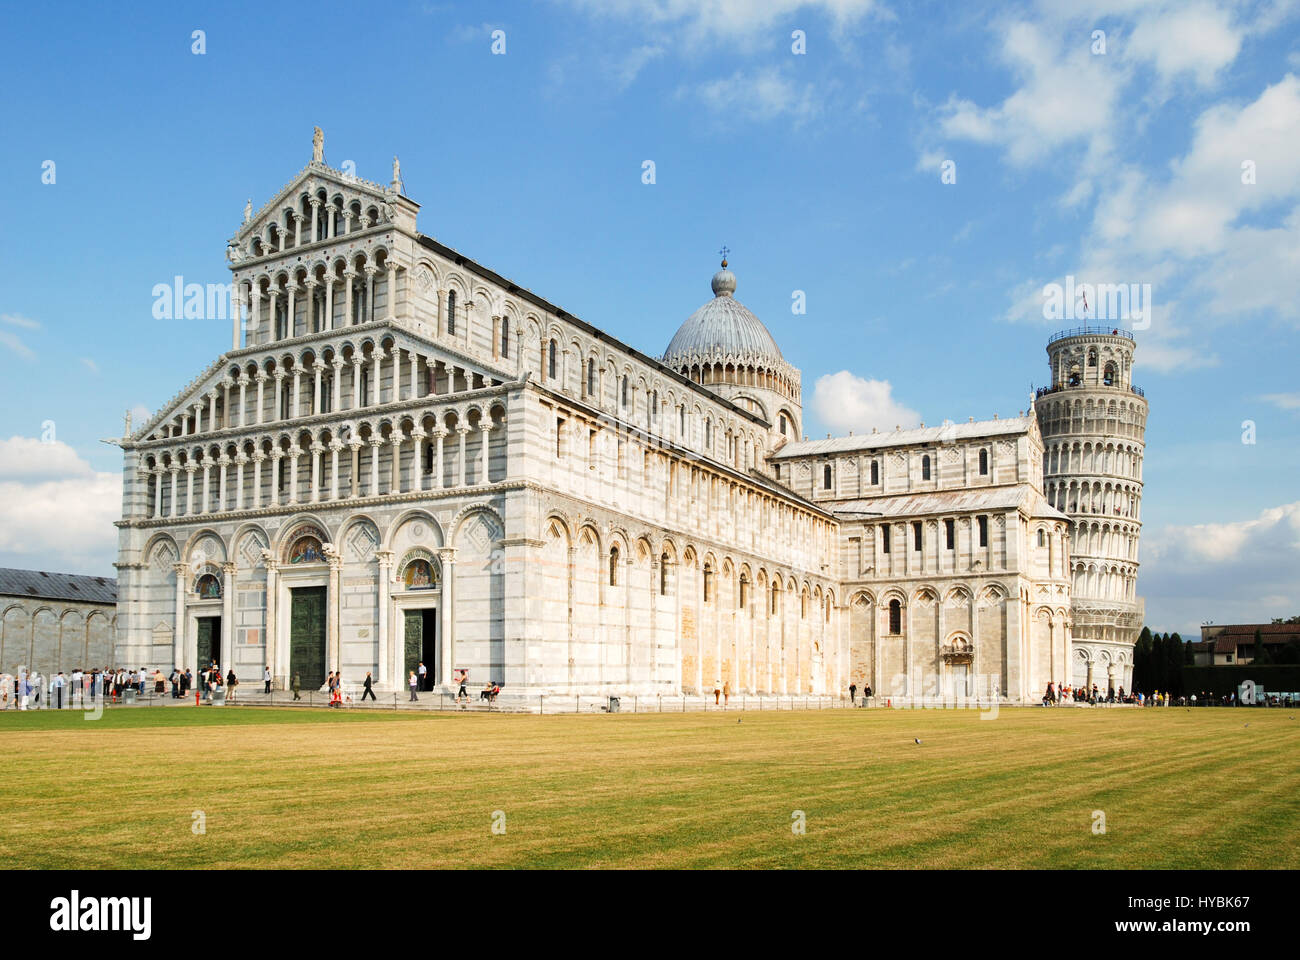 The cathedral and leaning tower of Pisa, Italy on a sunny day in October. Stock Photo